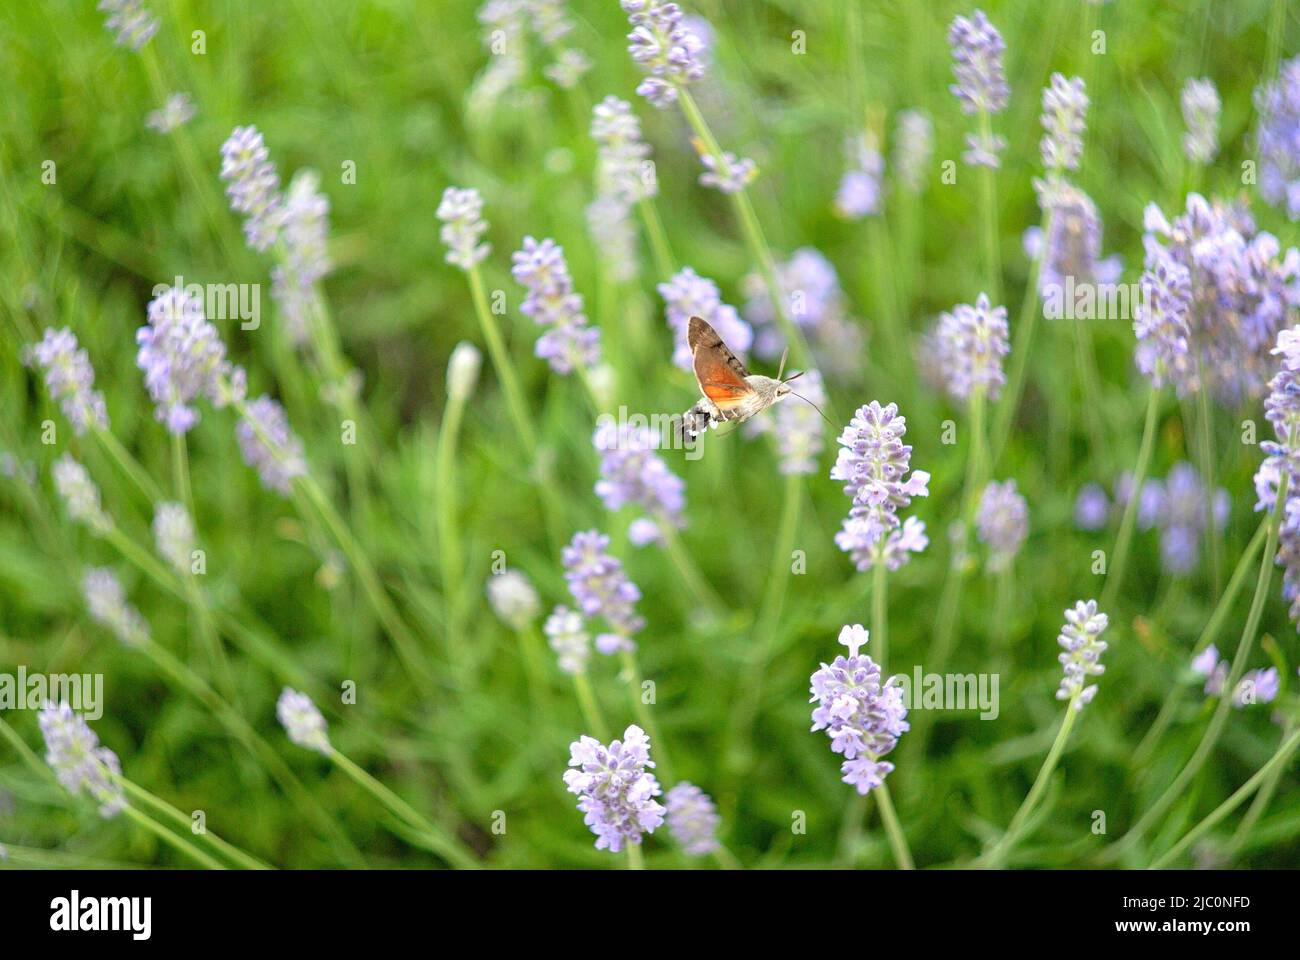 Pictures of bees, and other insects in lavender flowers Stock Photo